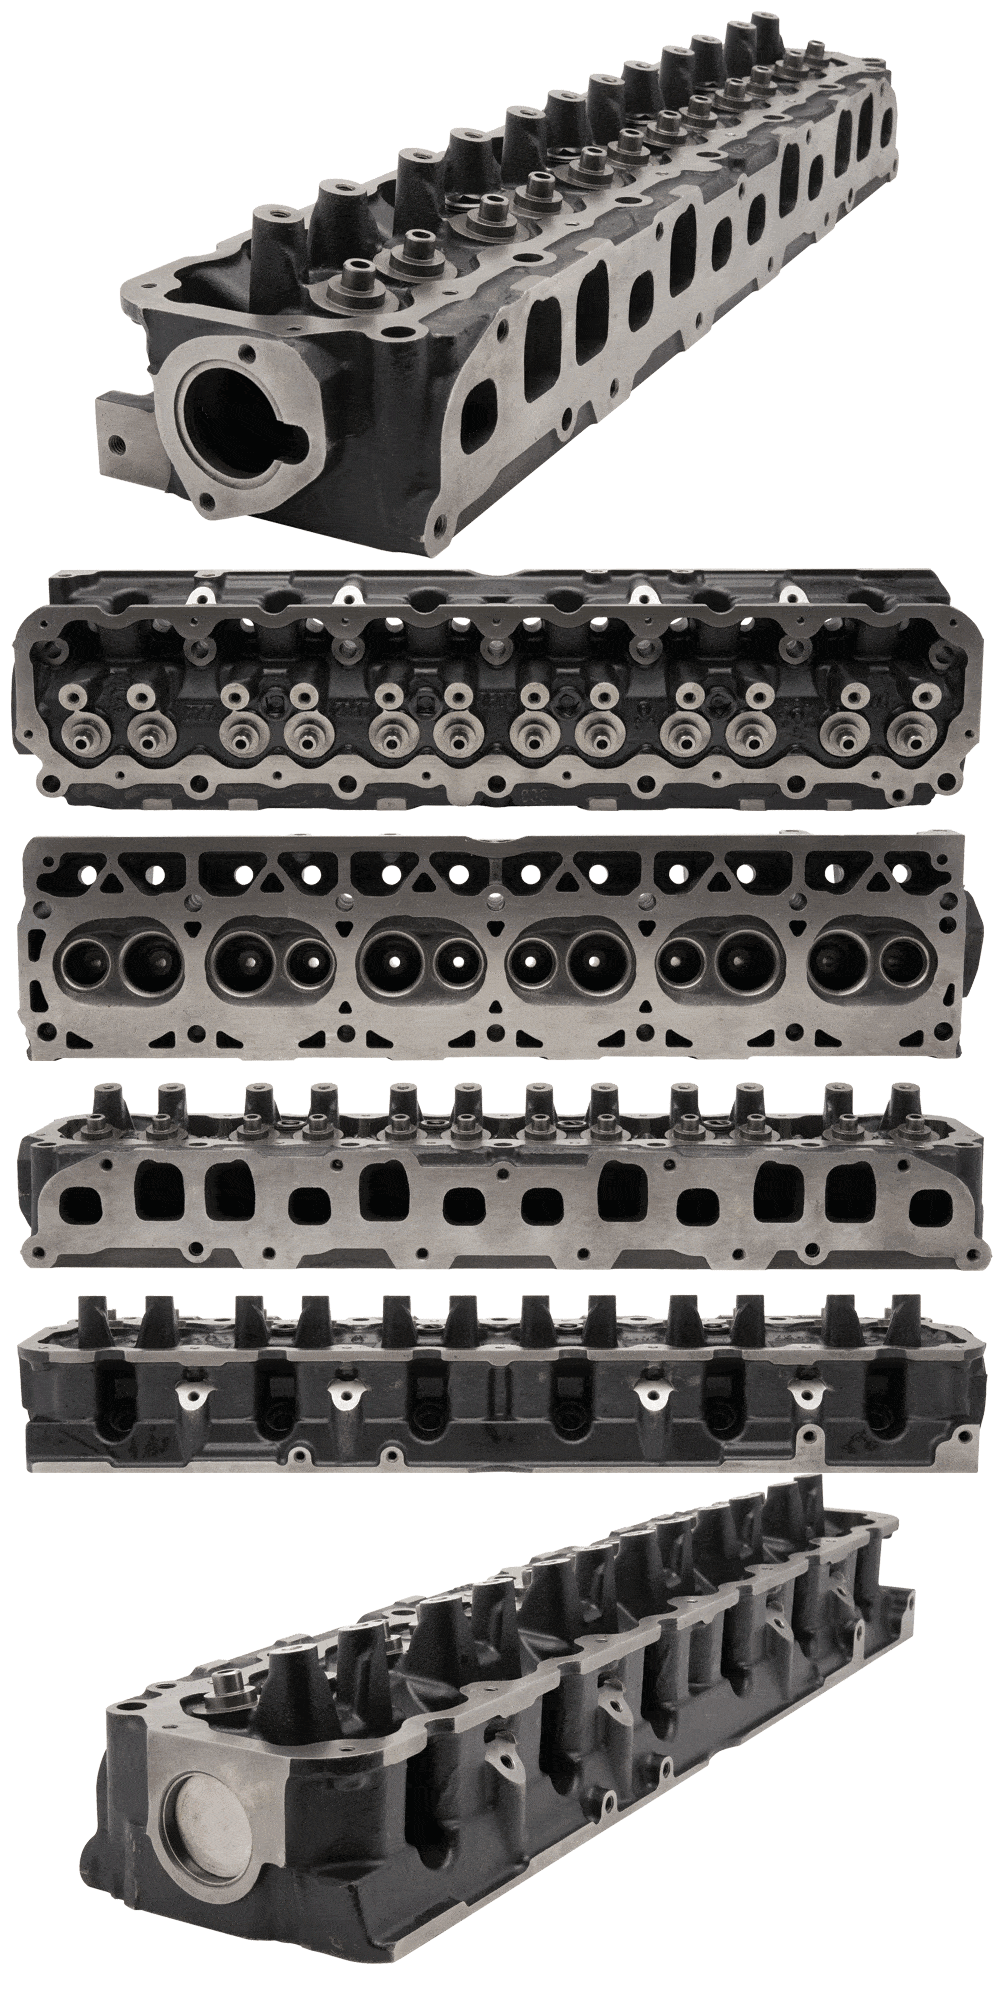 4.0L Jeep Cylinder Head New Bare Casting #0331-7120-0630 1998 - 2006